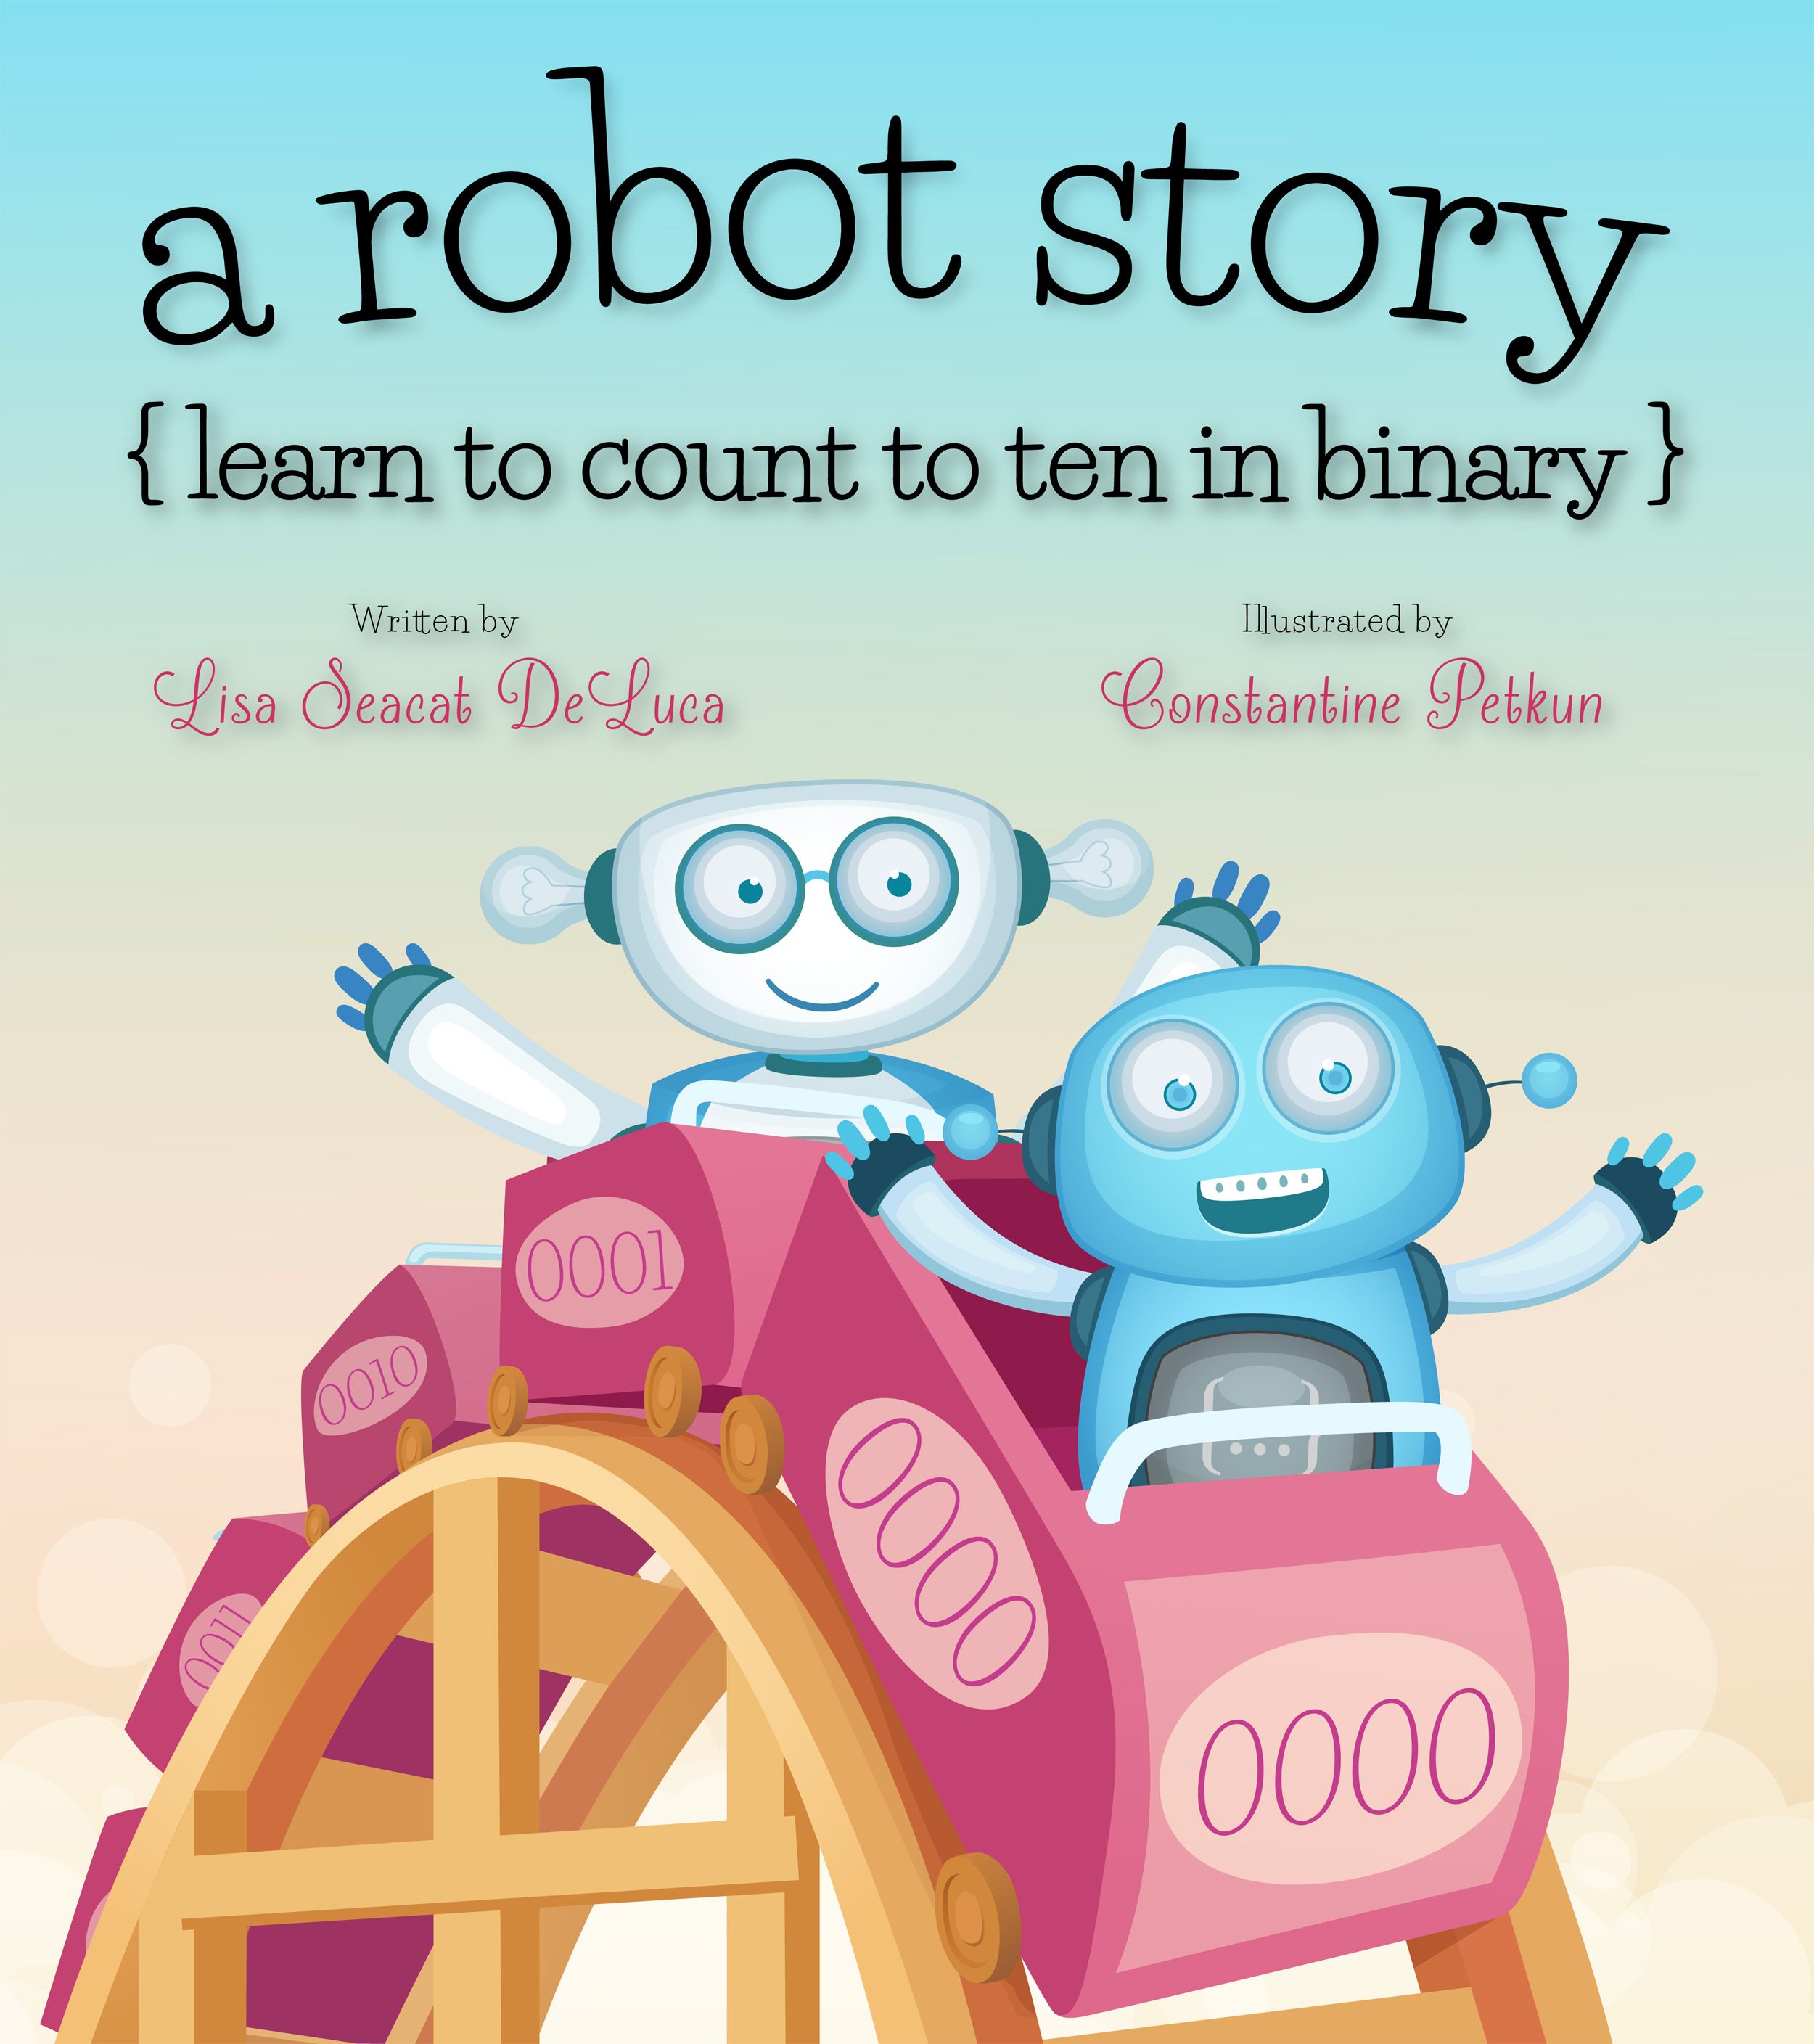 A Robot Story - Learn to Count Ten in Binary